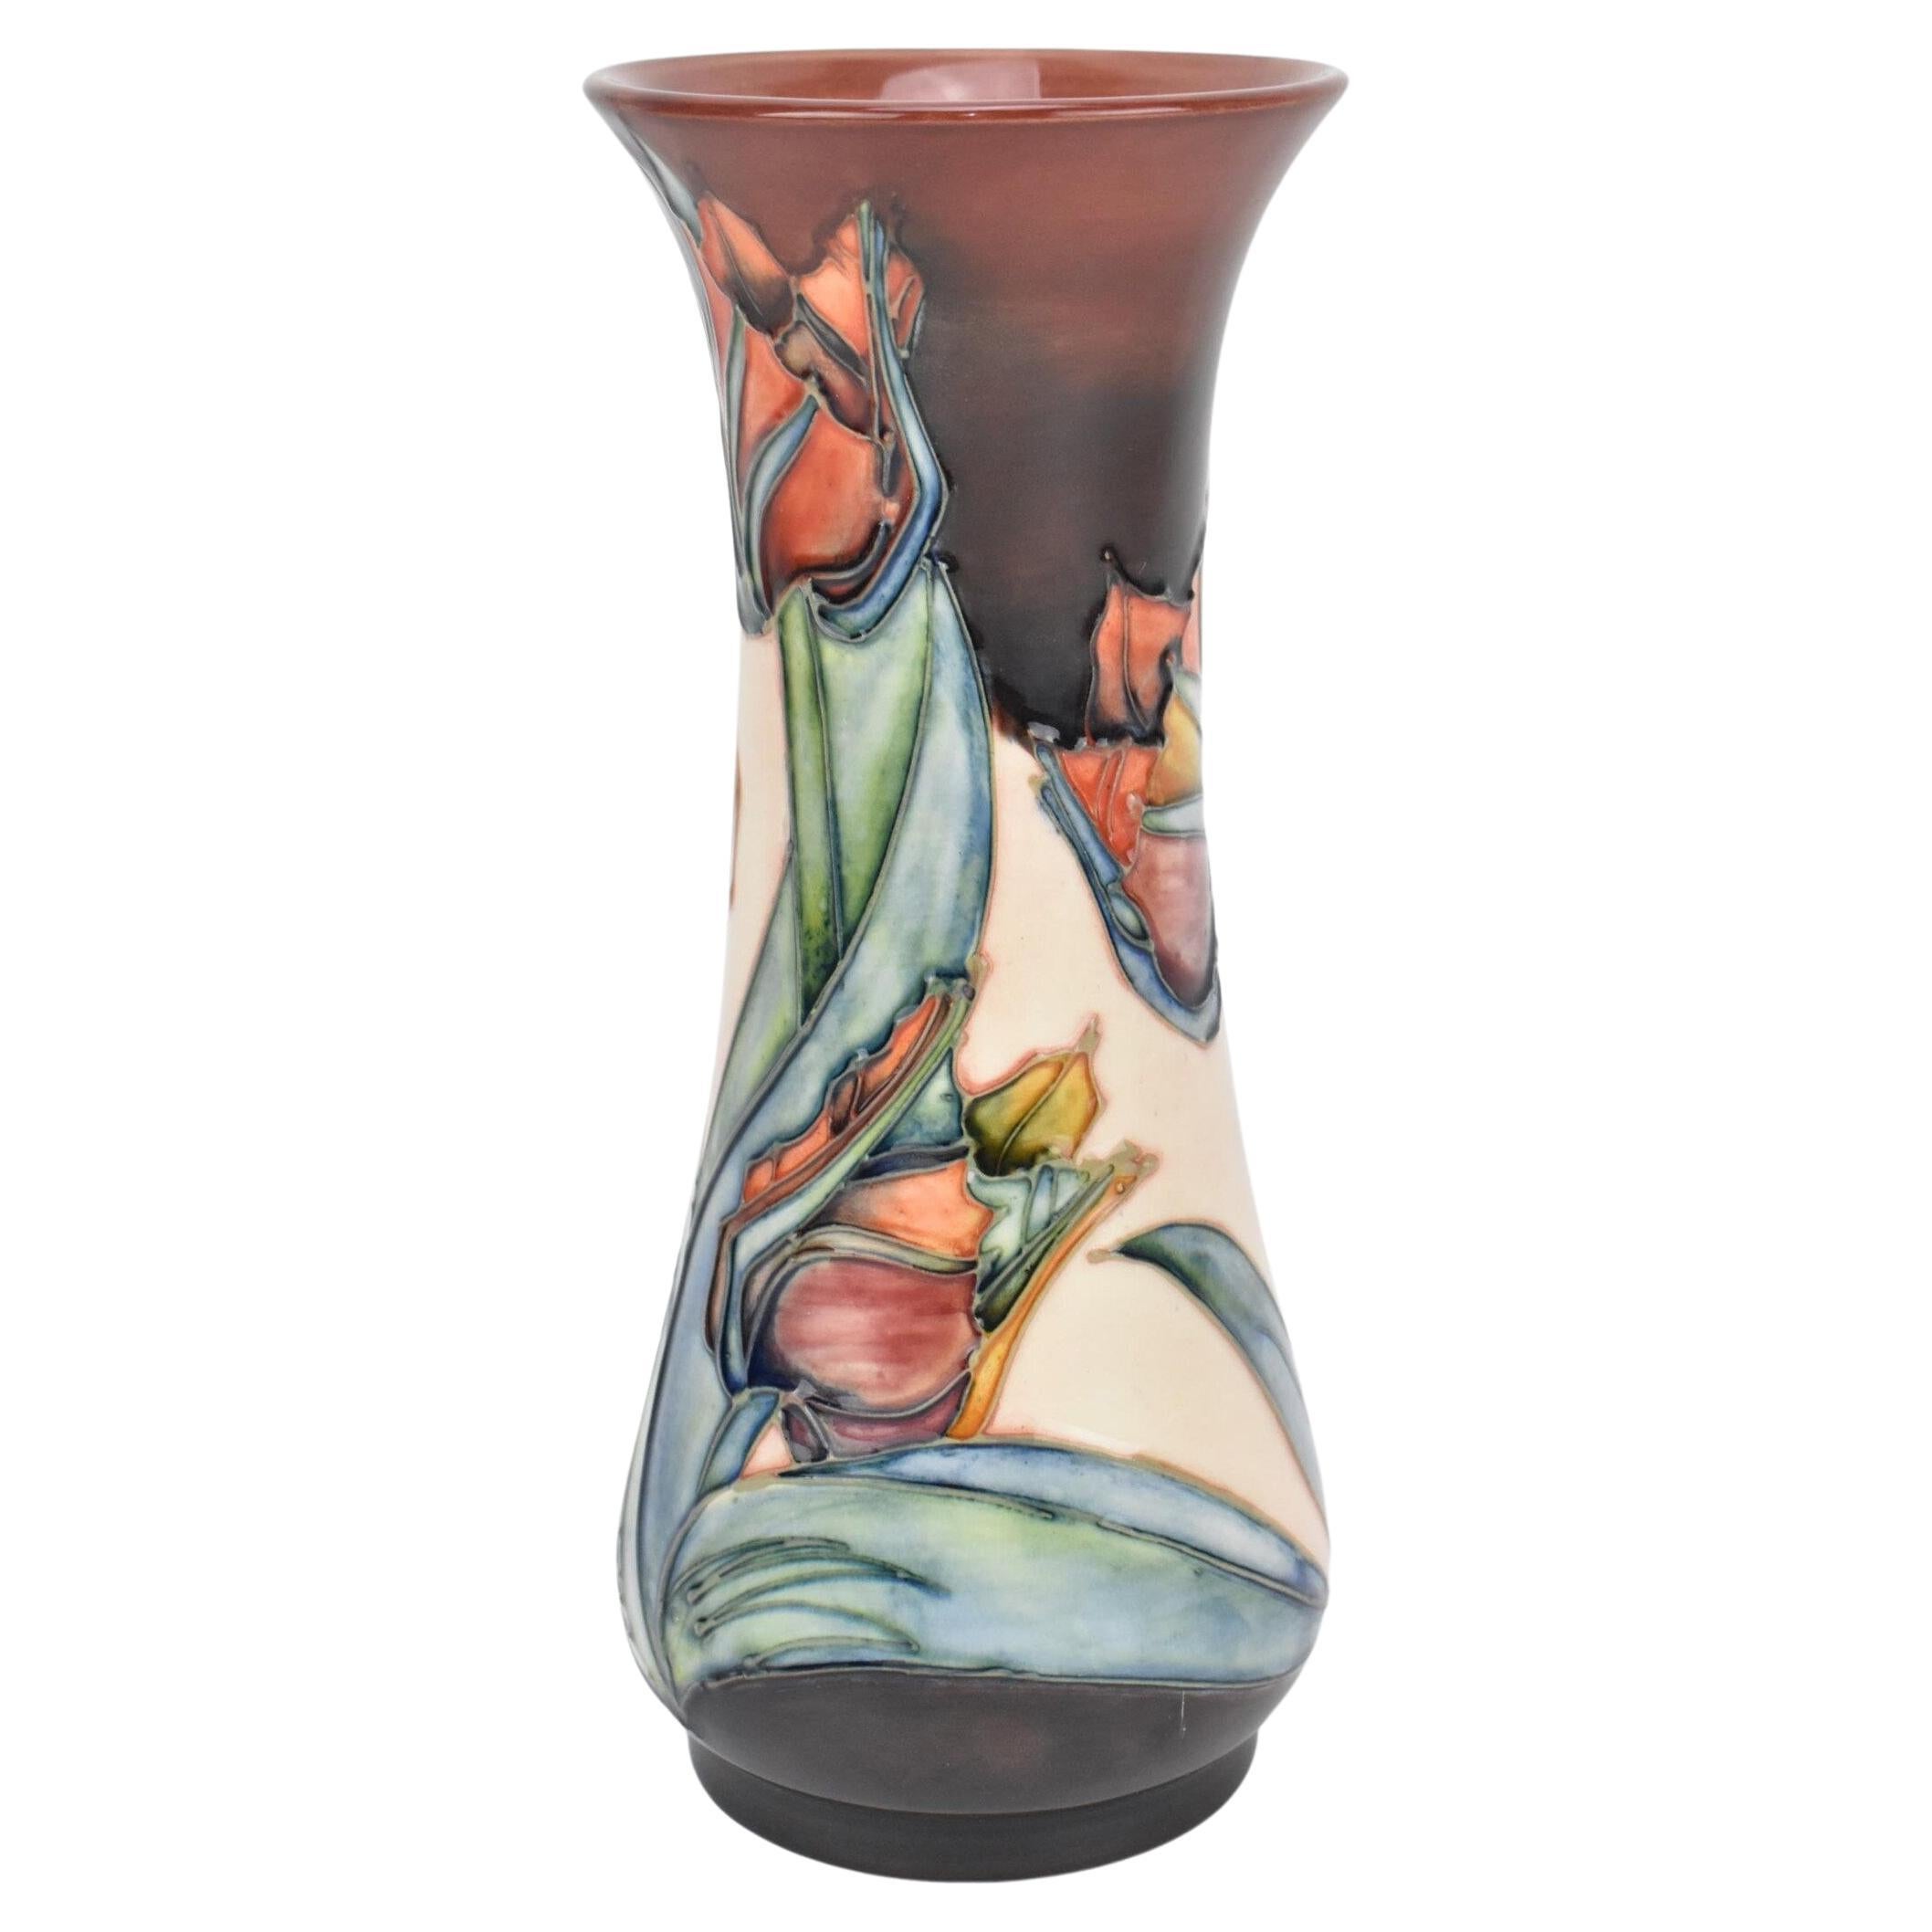 Art Nouveau style MOORCROFT vase by Sally Tuffin and painted by Sharon Austin. 